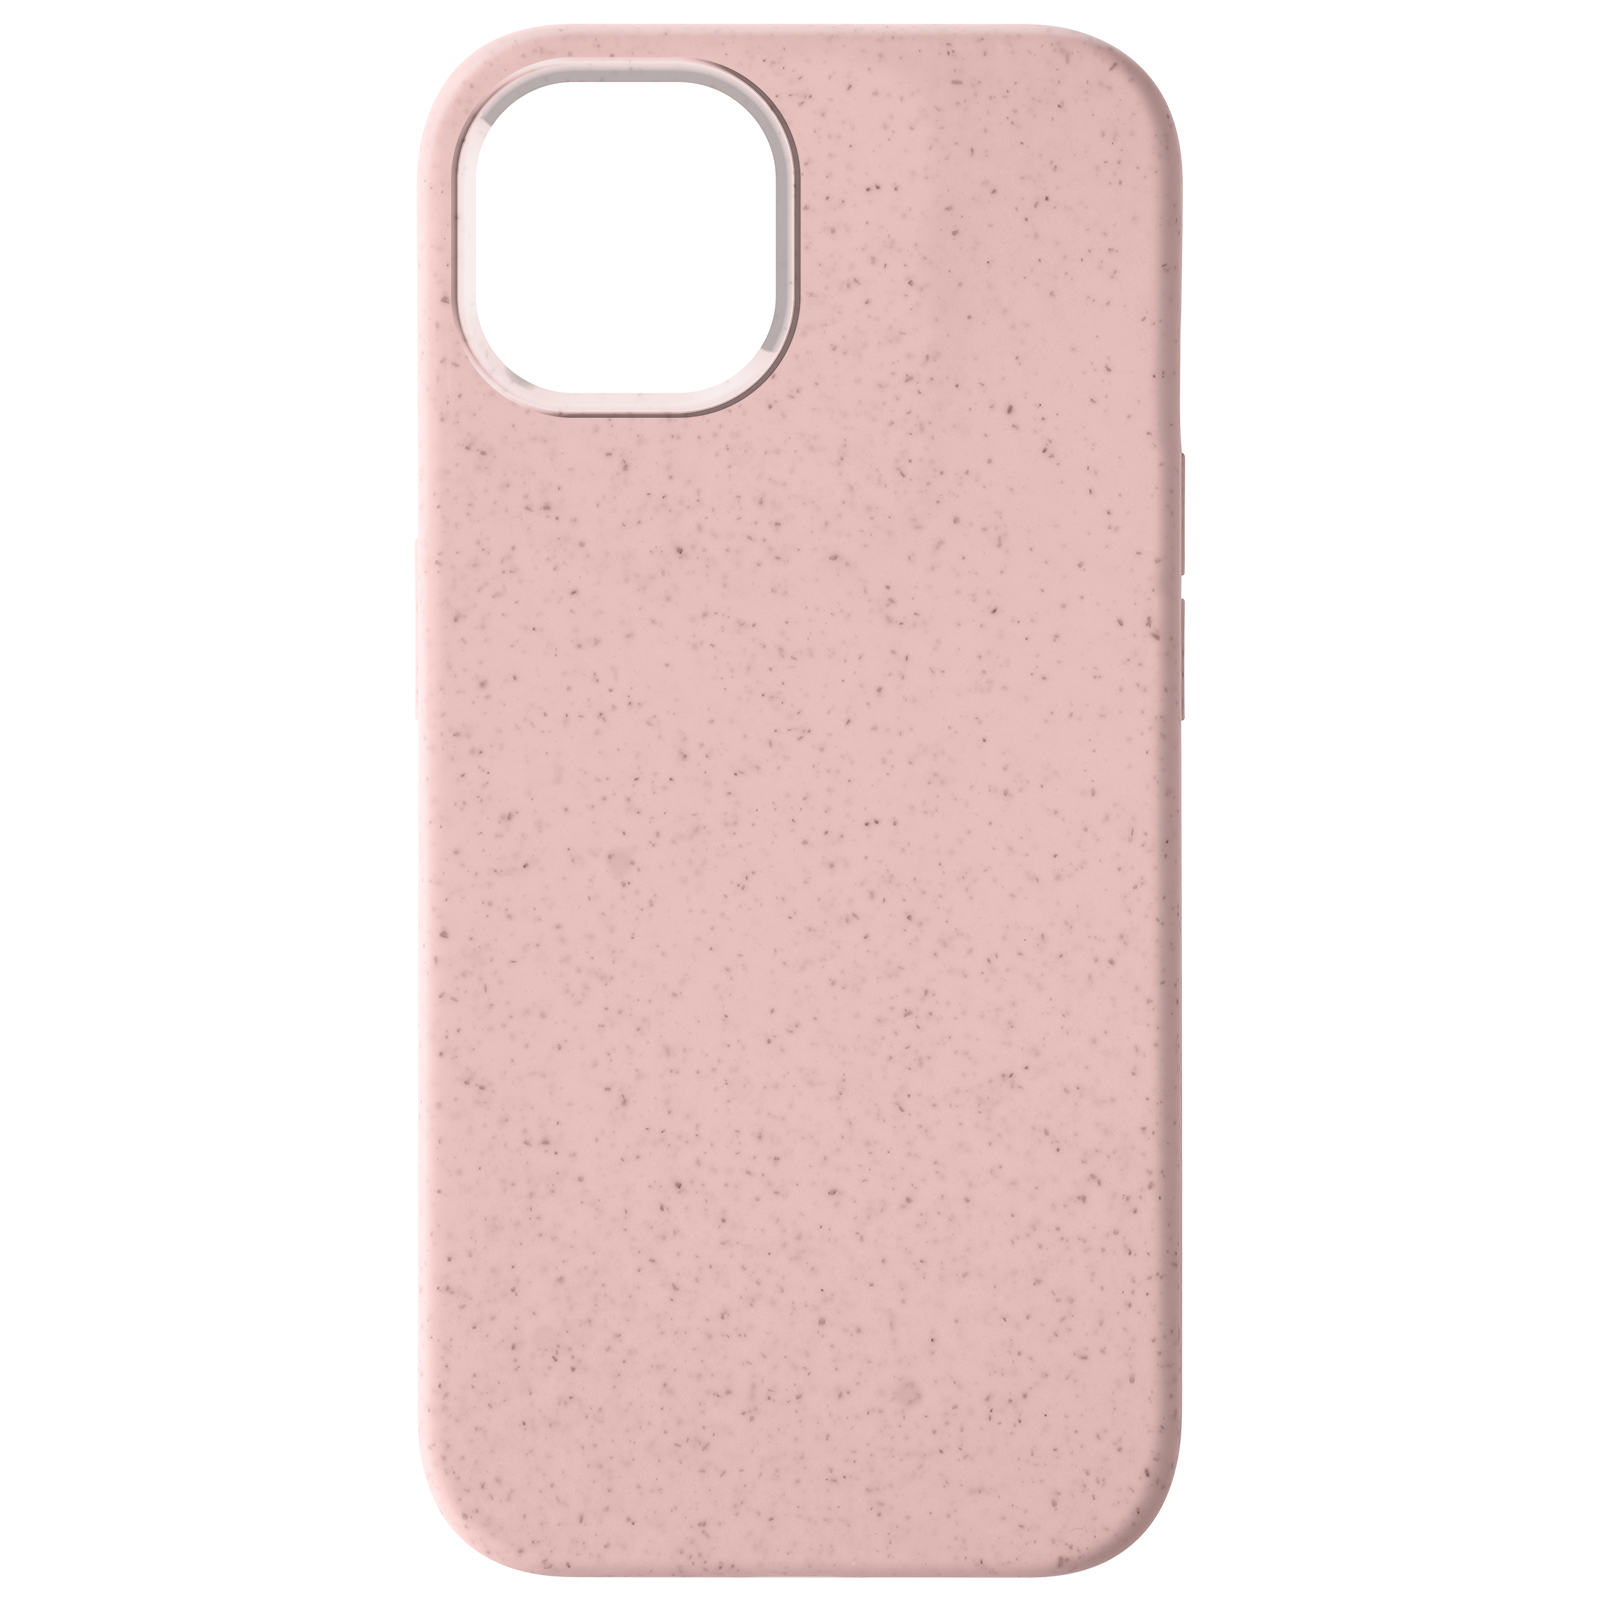 15, AVIZAR Apple, iPhone Series, Backcover, Handyhülle 100% Recyclebare Rosa